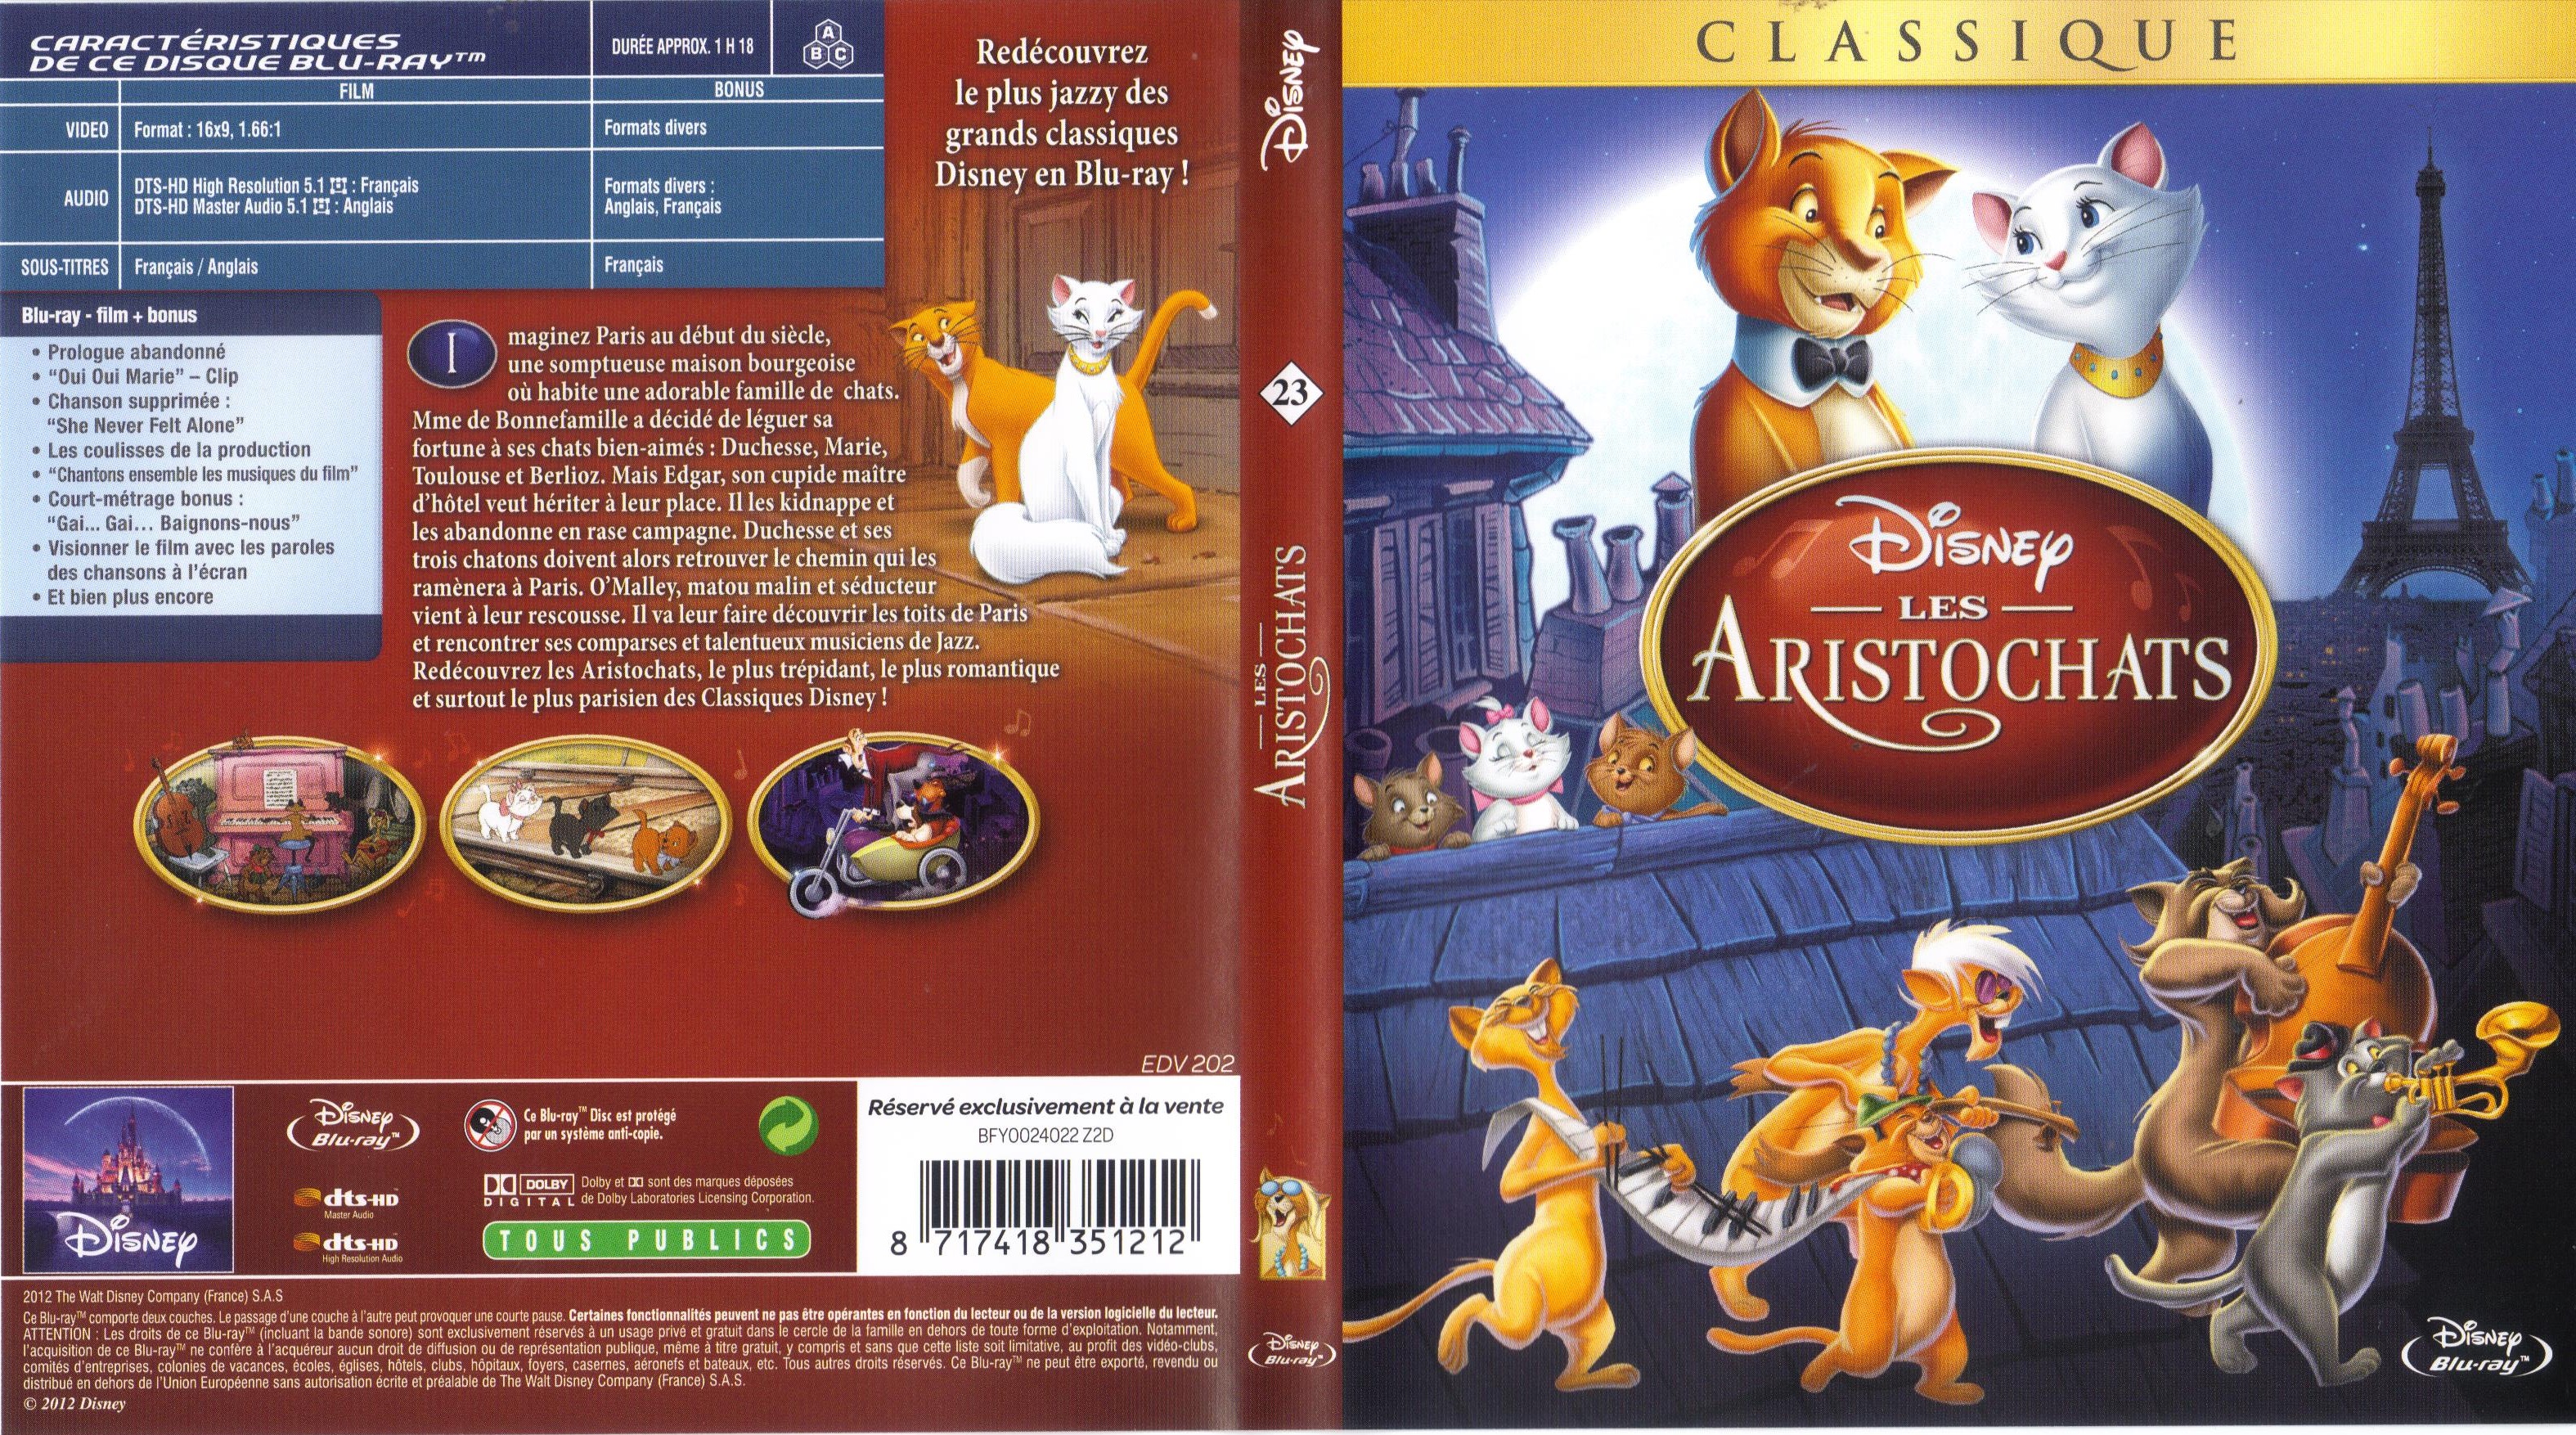 Jaquette DVD Les aristochats (BLU-RAY) v2